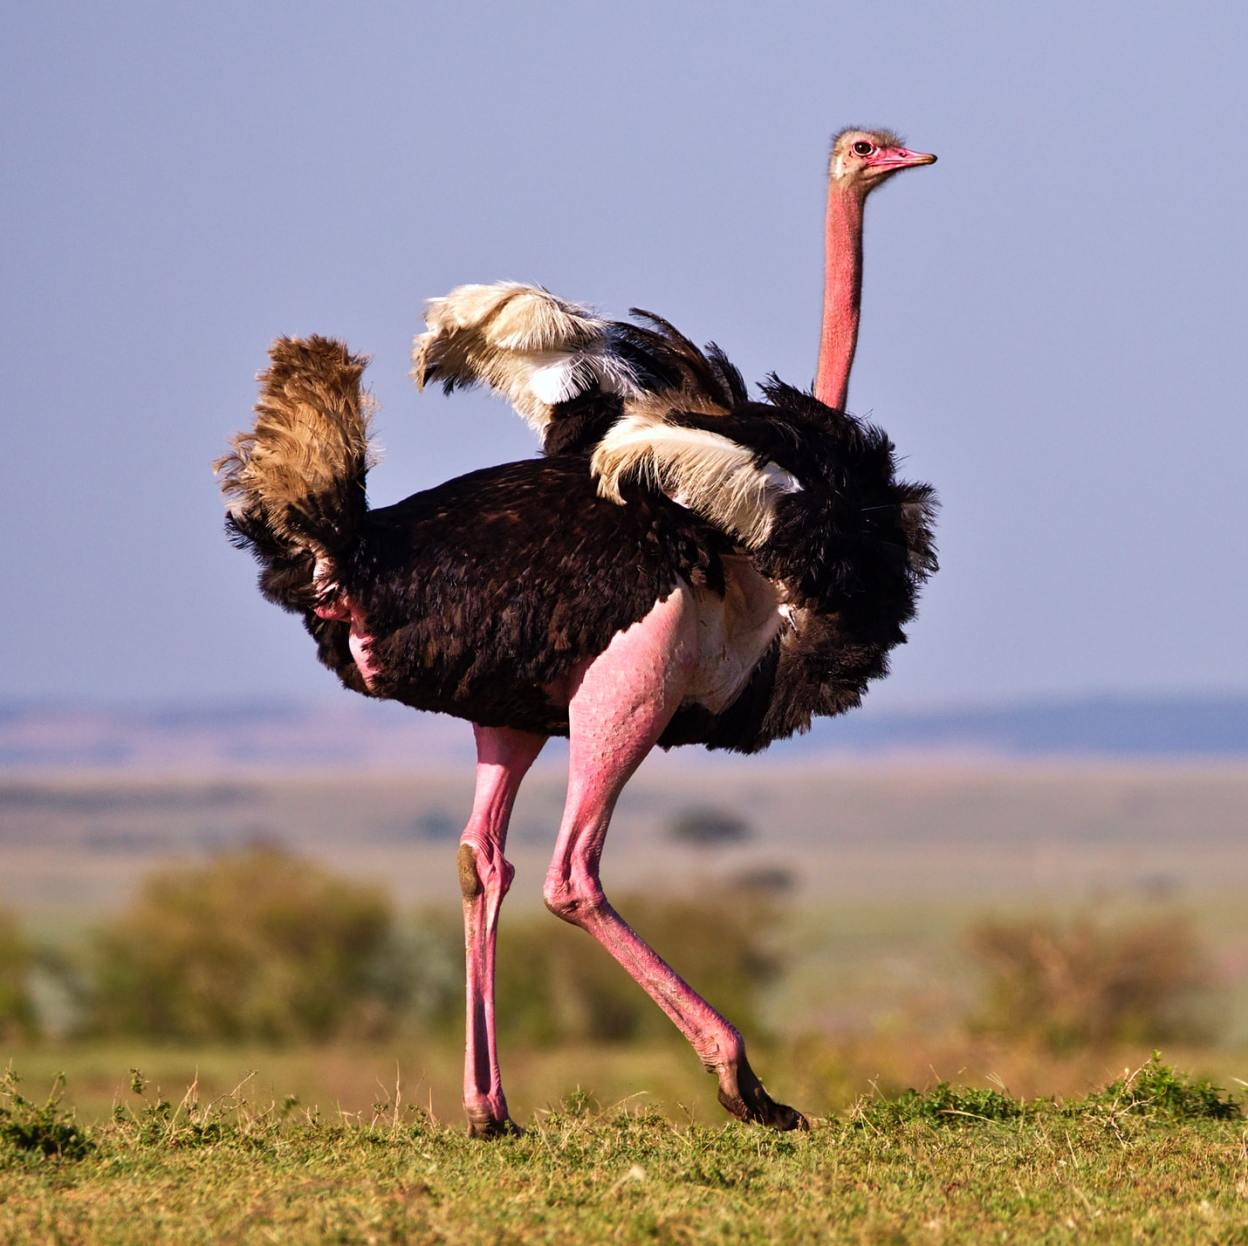 Photo of an ostrich against a blurred african, dry background.